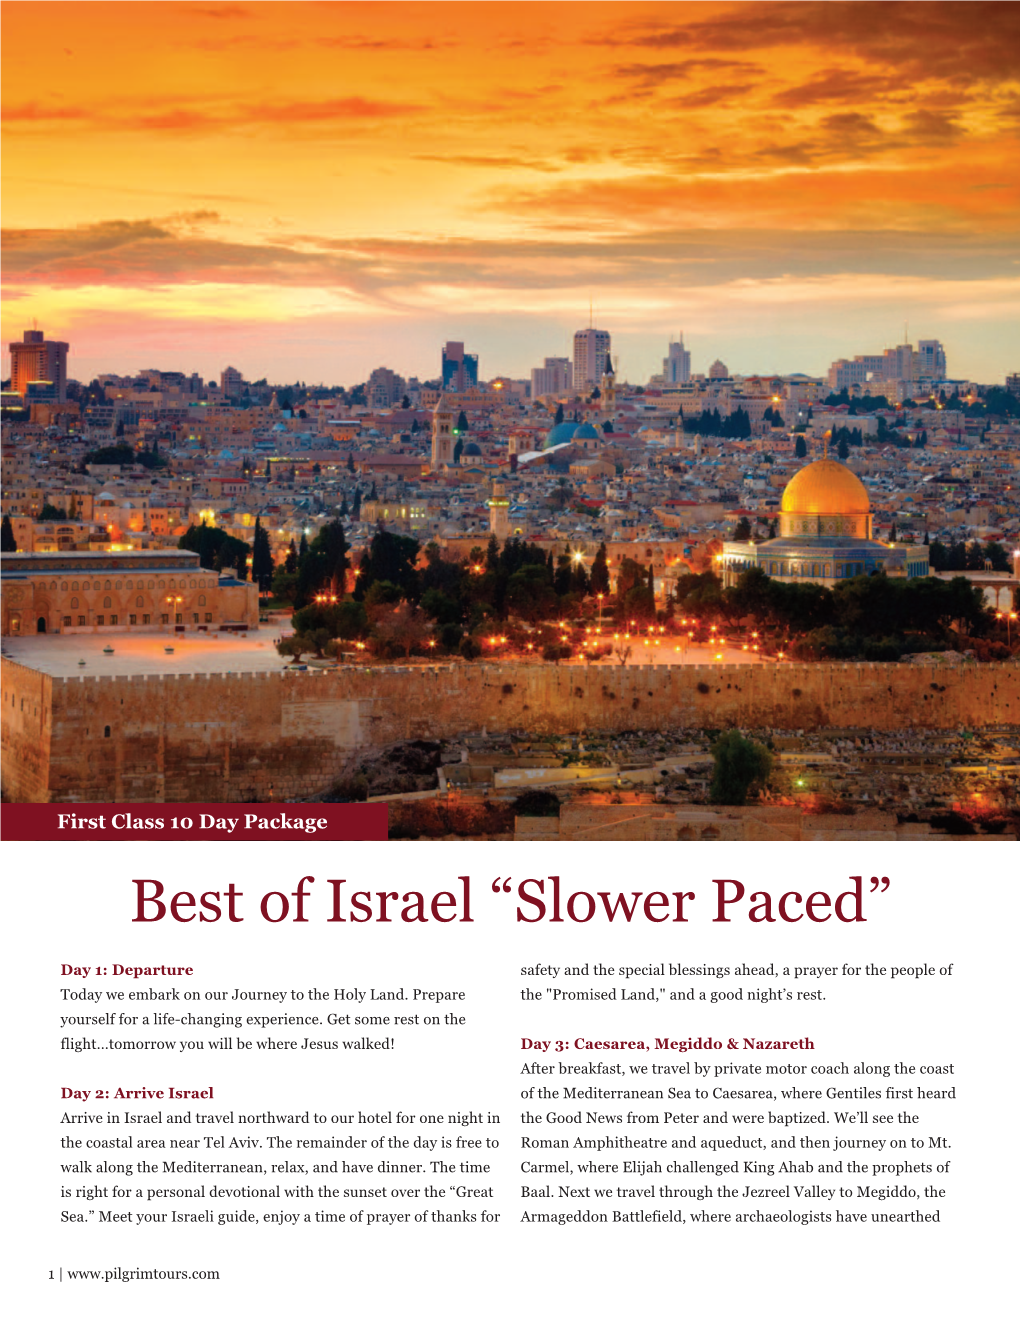 Best of Israel “Slower Paced” Day 1: Departure Safety and the Special Blessings Ahead, a Prayer for the People of Today We Embark on Our Journey to the Holy Land